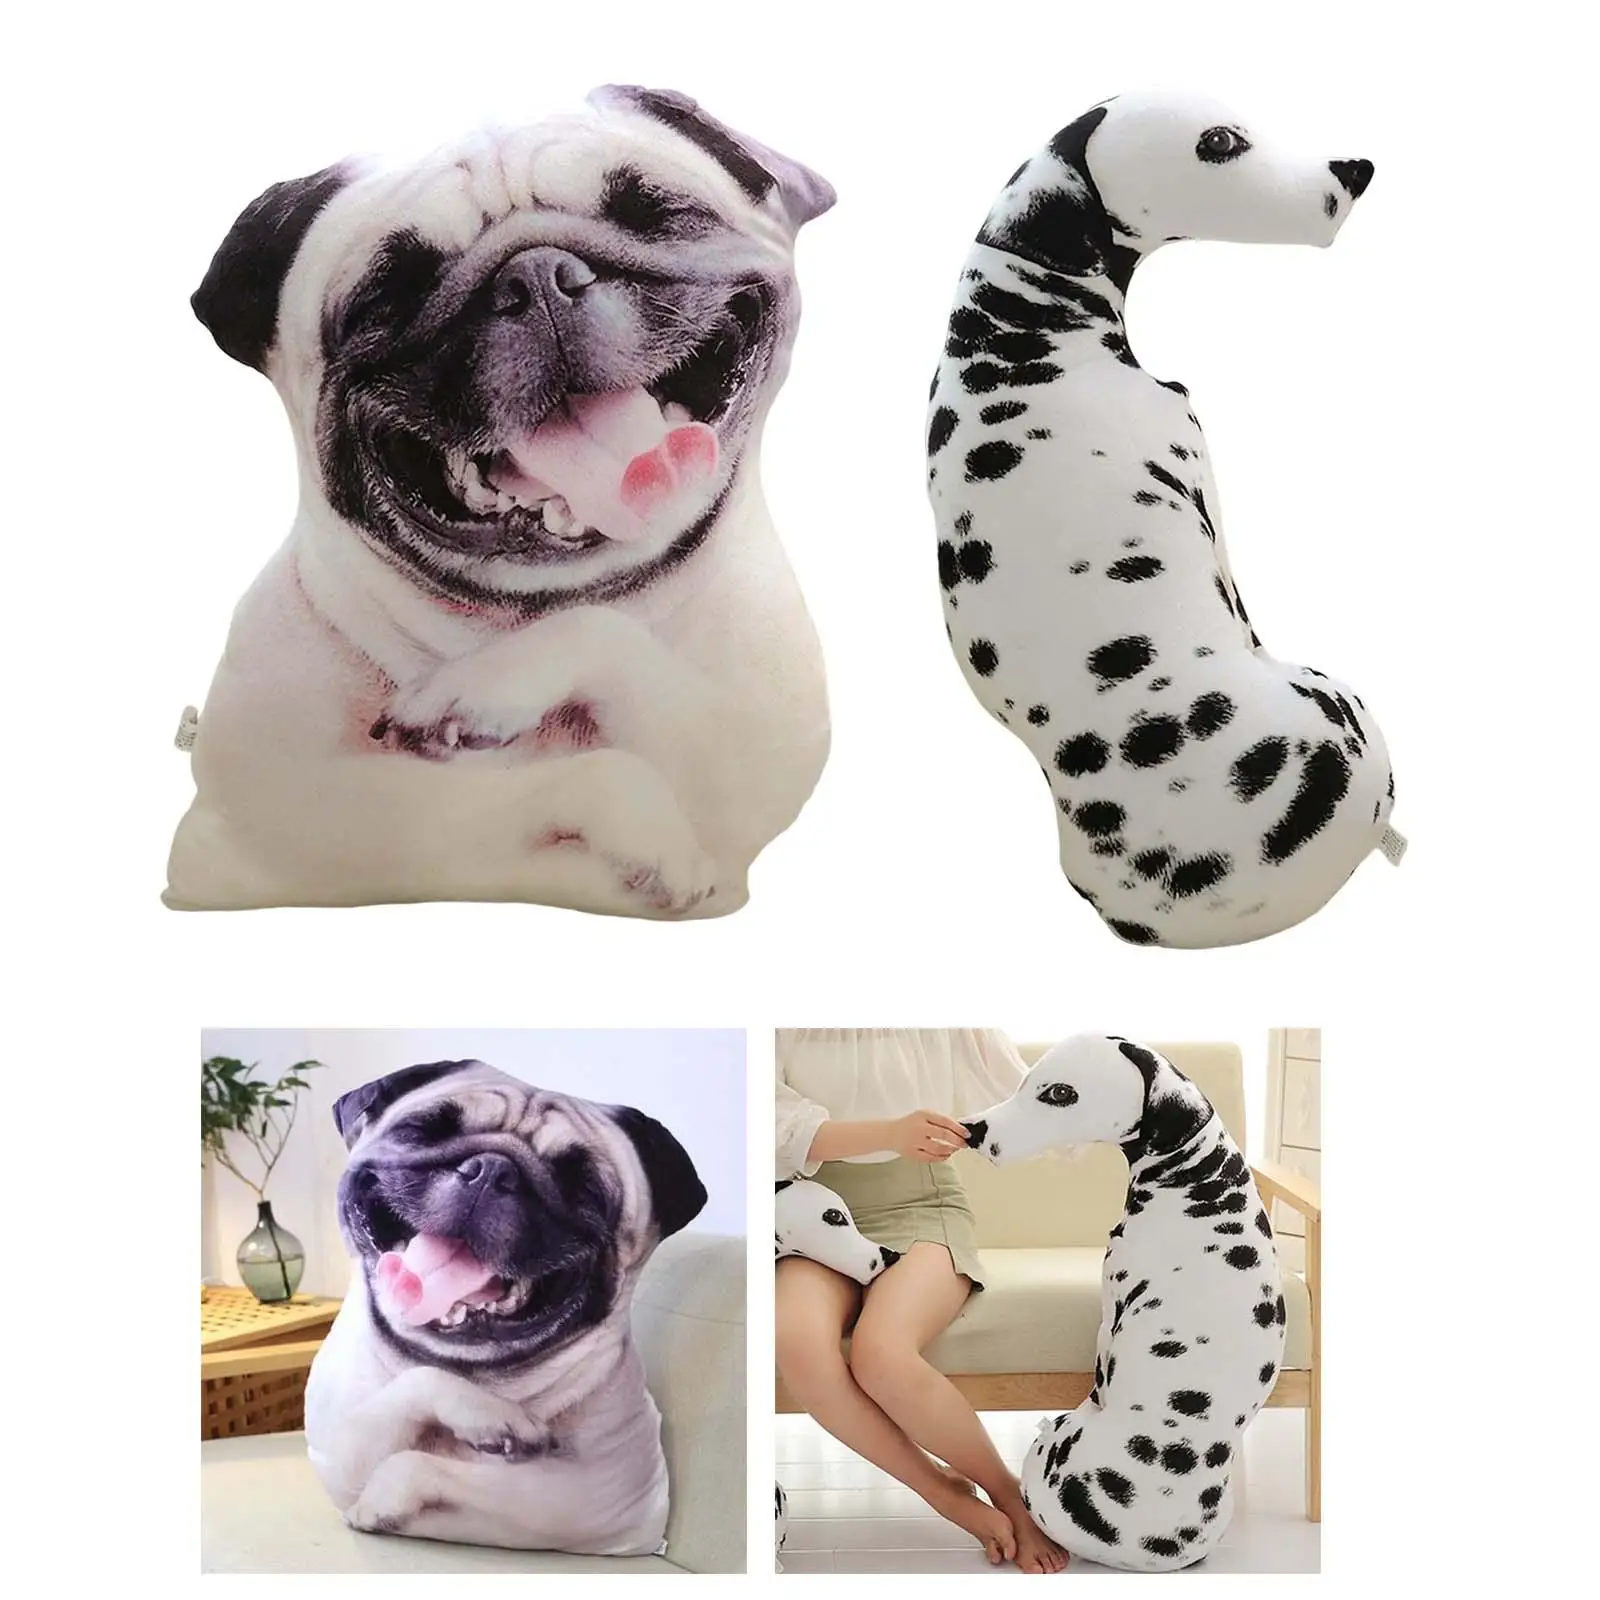 Dog Throw Pillow Cute Figurine Toys Simulation Dog Plush Toy for Home Decoration